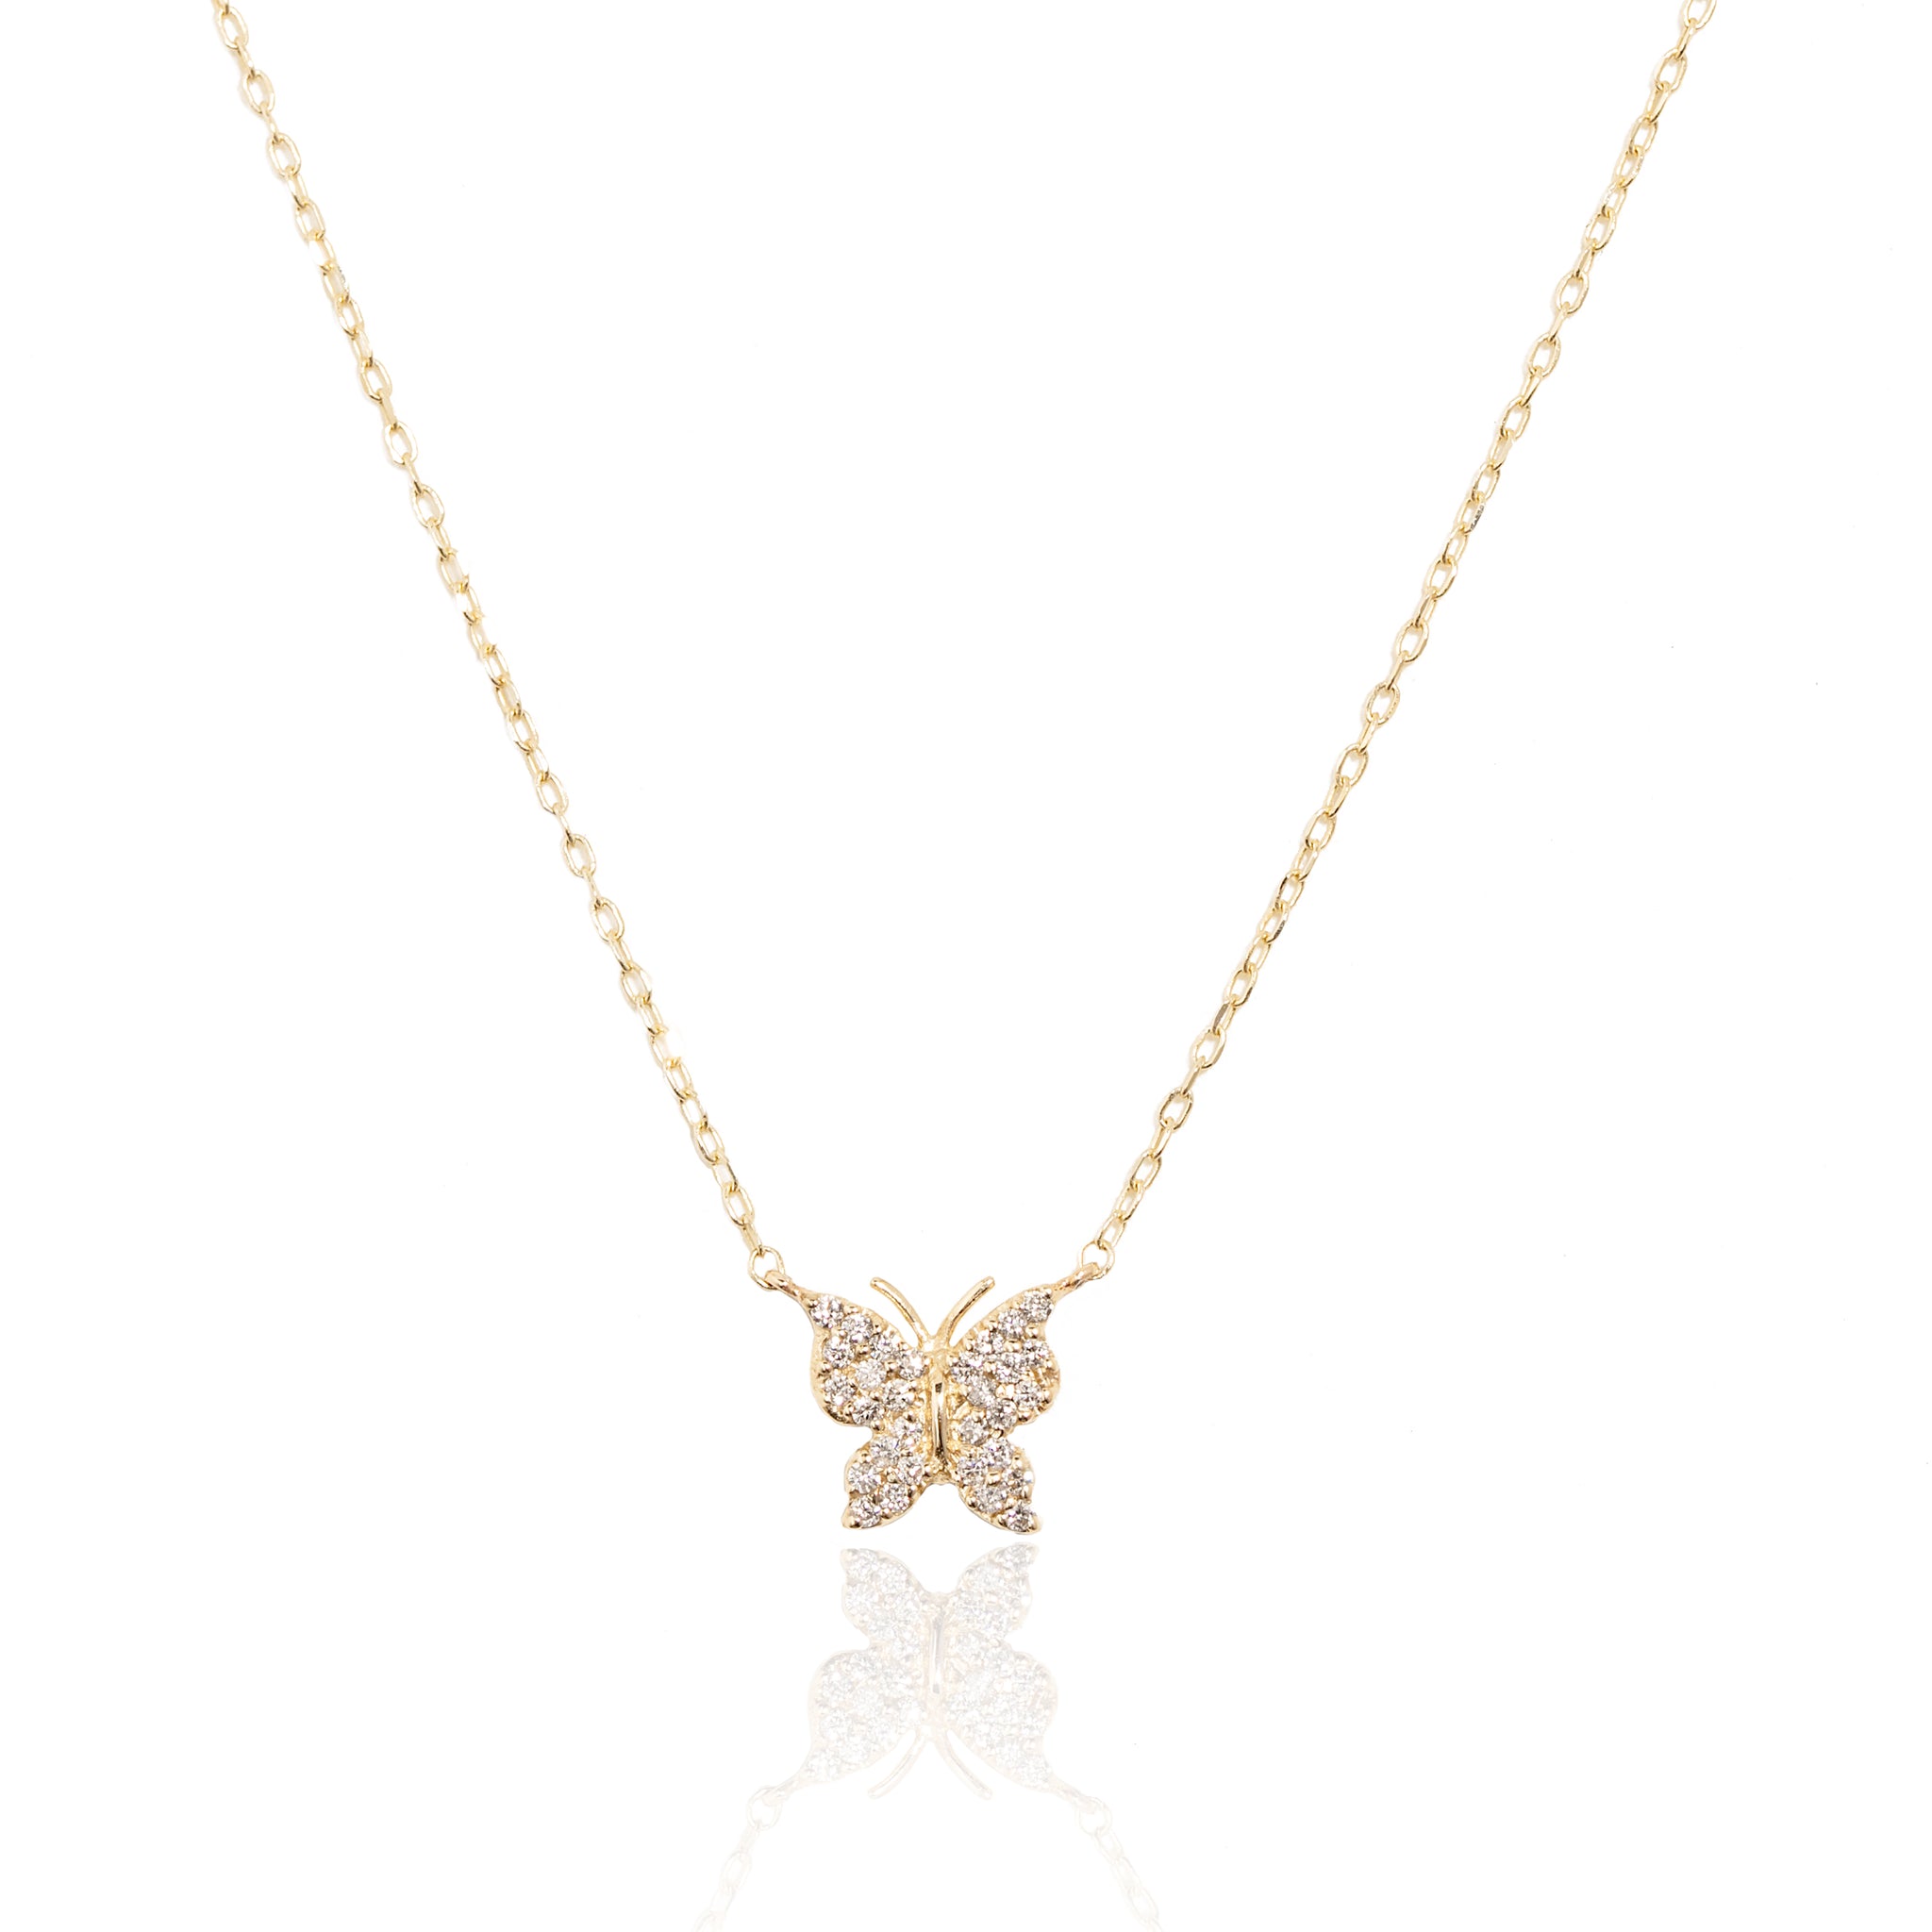 L.A. STEIN Diamond Pavé Butterfly Necklace in 14k Yellow Gold